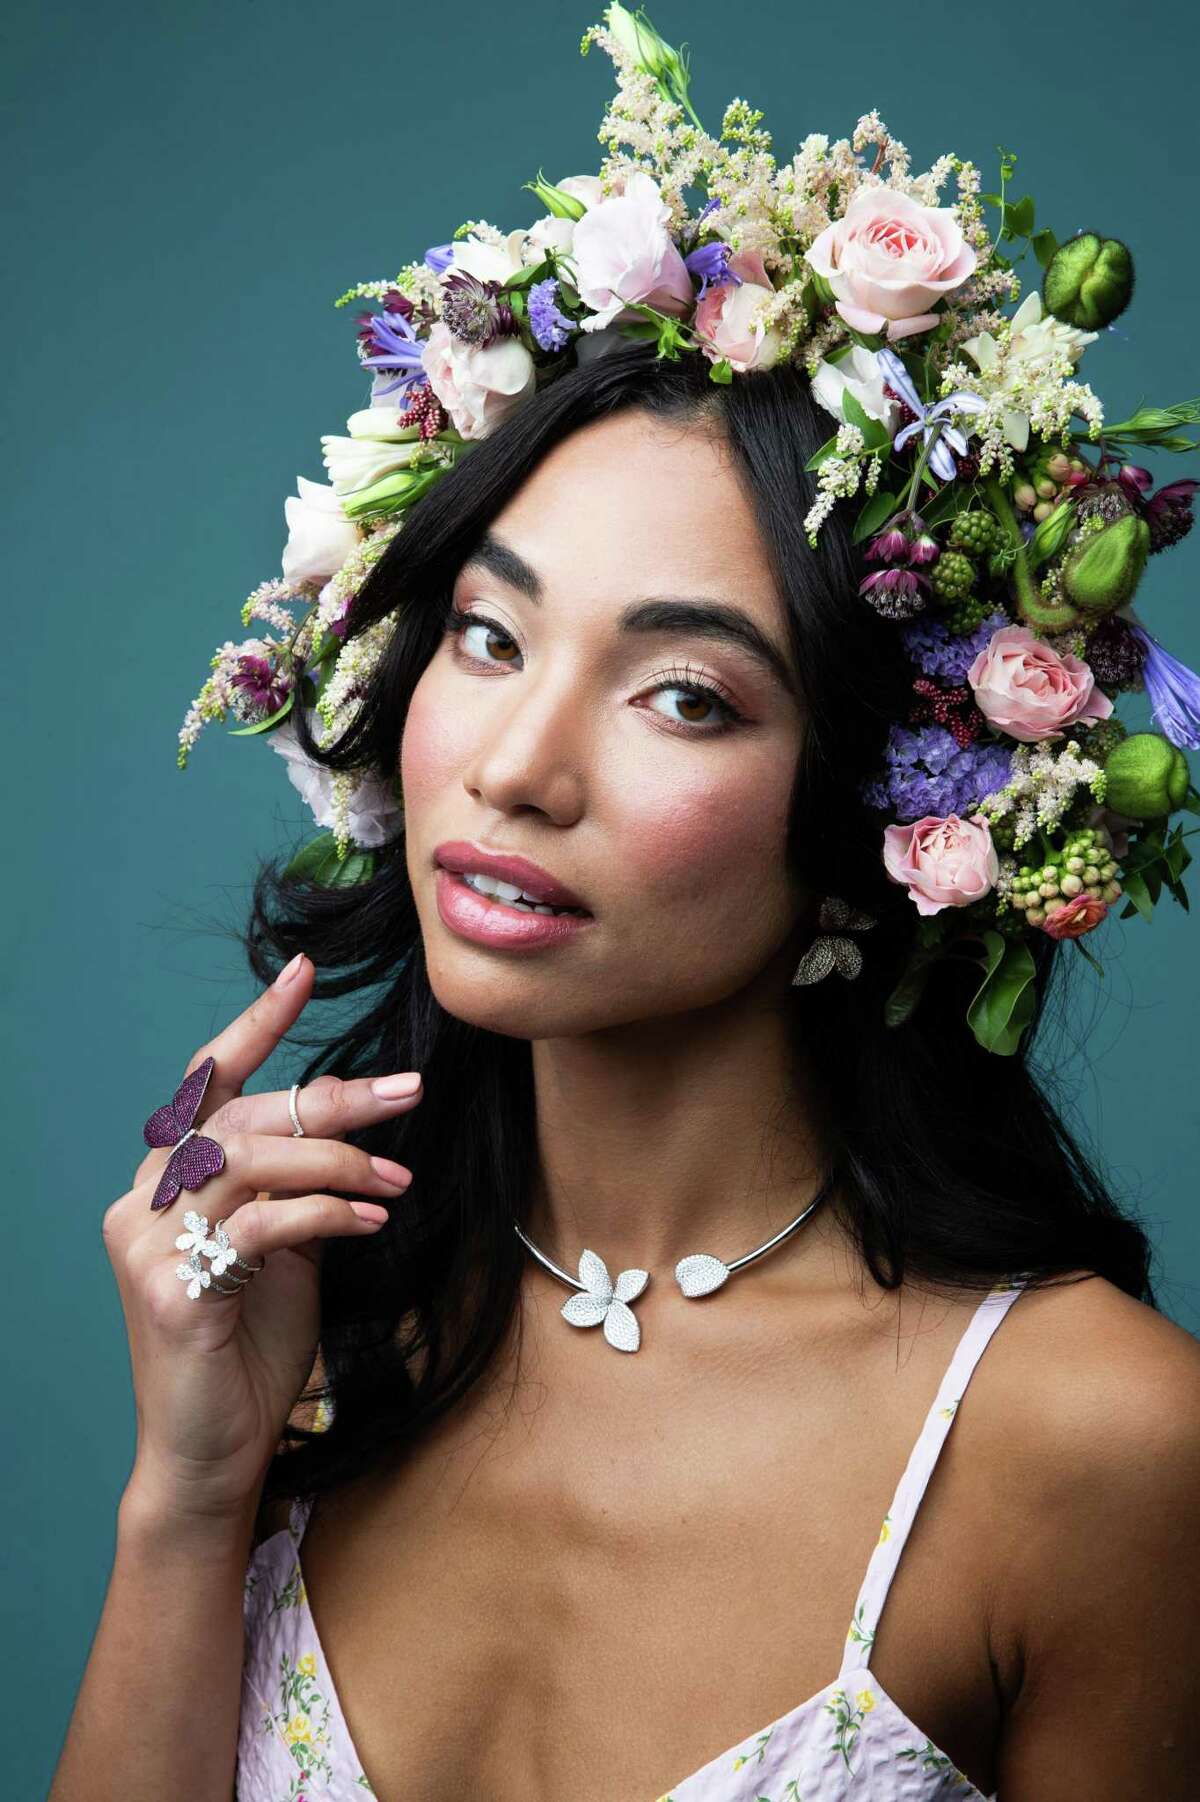 Gabriella wears a bustier mini dress ($595) by Soft Animal with Pasquale Bruni Giadini Segretti earrings ($21,500) and necklace ($28,700) from Zadok Jewelers and a custom Ace Berry headpiece ($300) from Fulshear Floral Design.